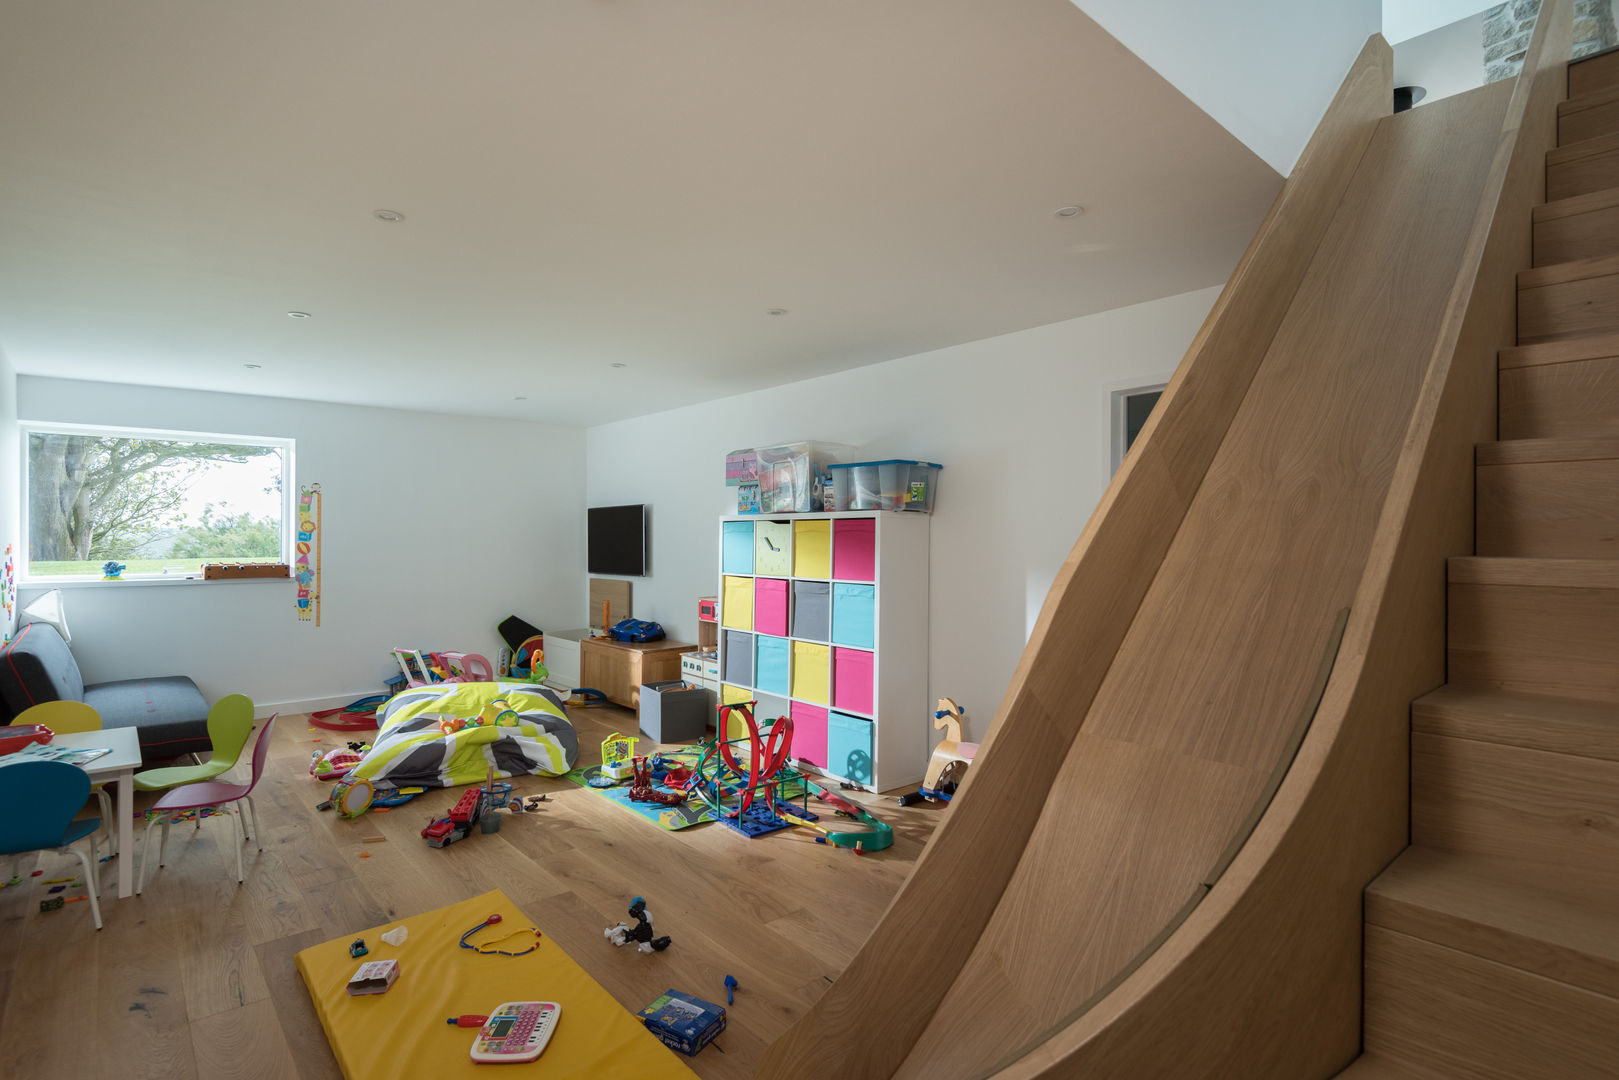 Contemporary Replacement Dwelling, Cubert, Laurence Associates Laurence Associates Modern nursery/kids room play room,game room,internal slide,fun,games,storage,children,toys,modular storage,bright colours,play,kids room